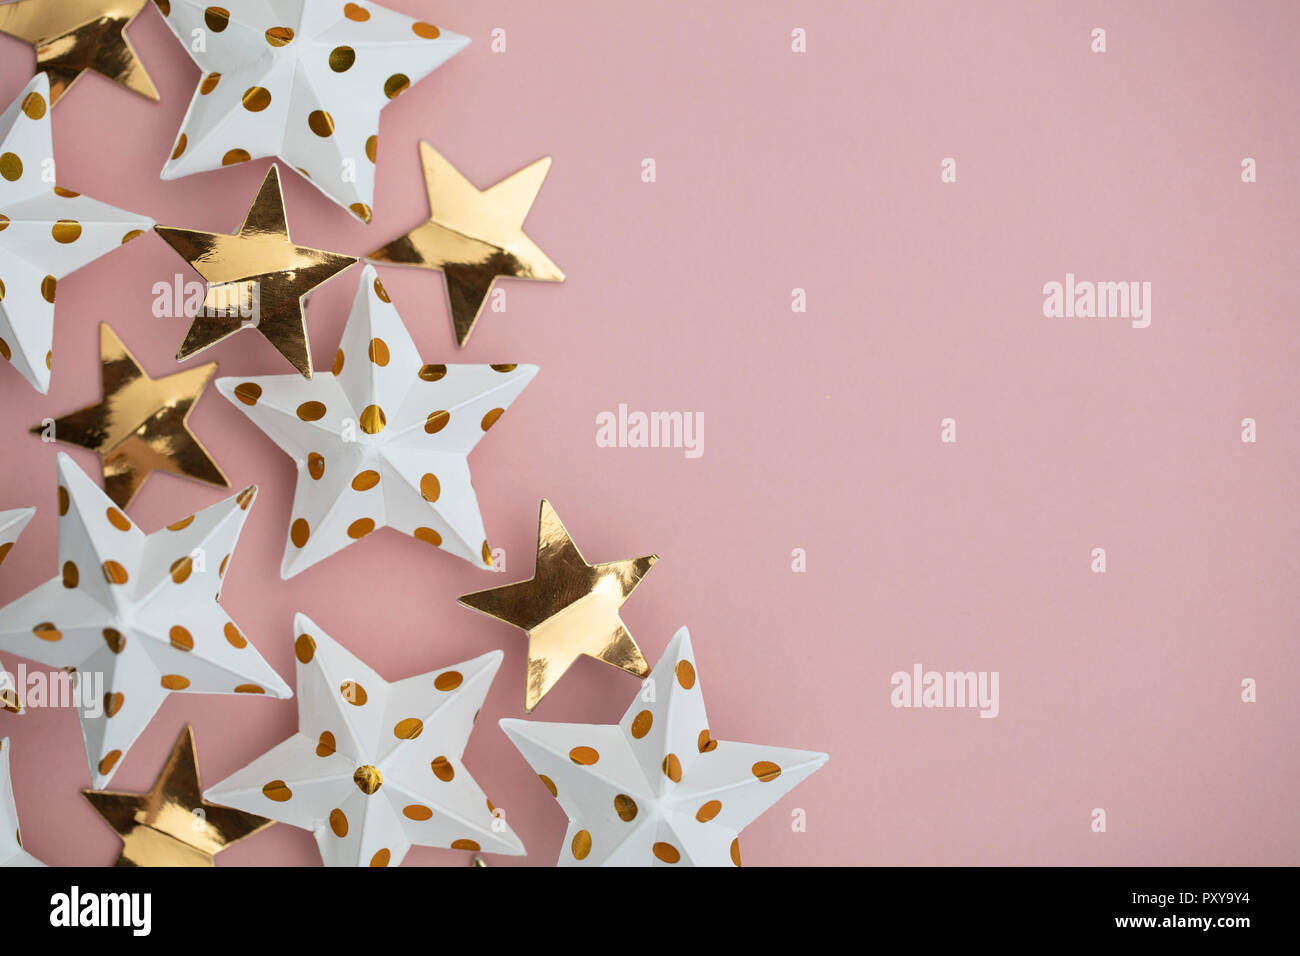 White And Gold Star Decorations On A Pastel Pink Seasonal Festive